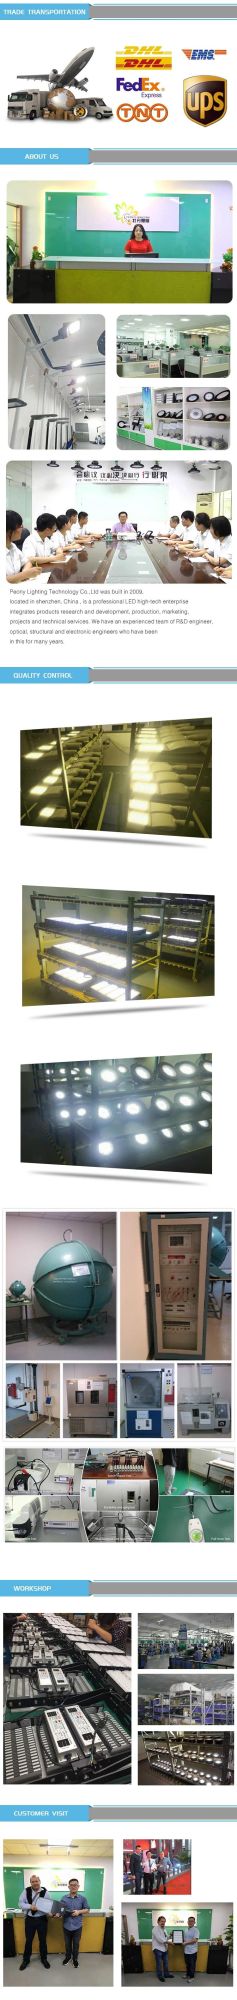 Newest Design 80-100W LED Street Lamp with 8 Years Warranty LED Road Light